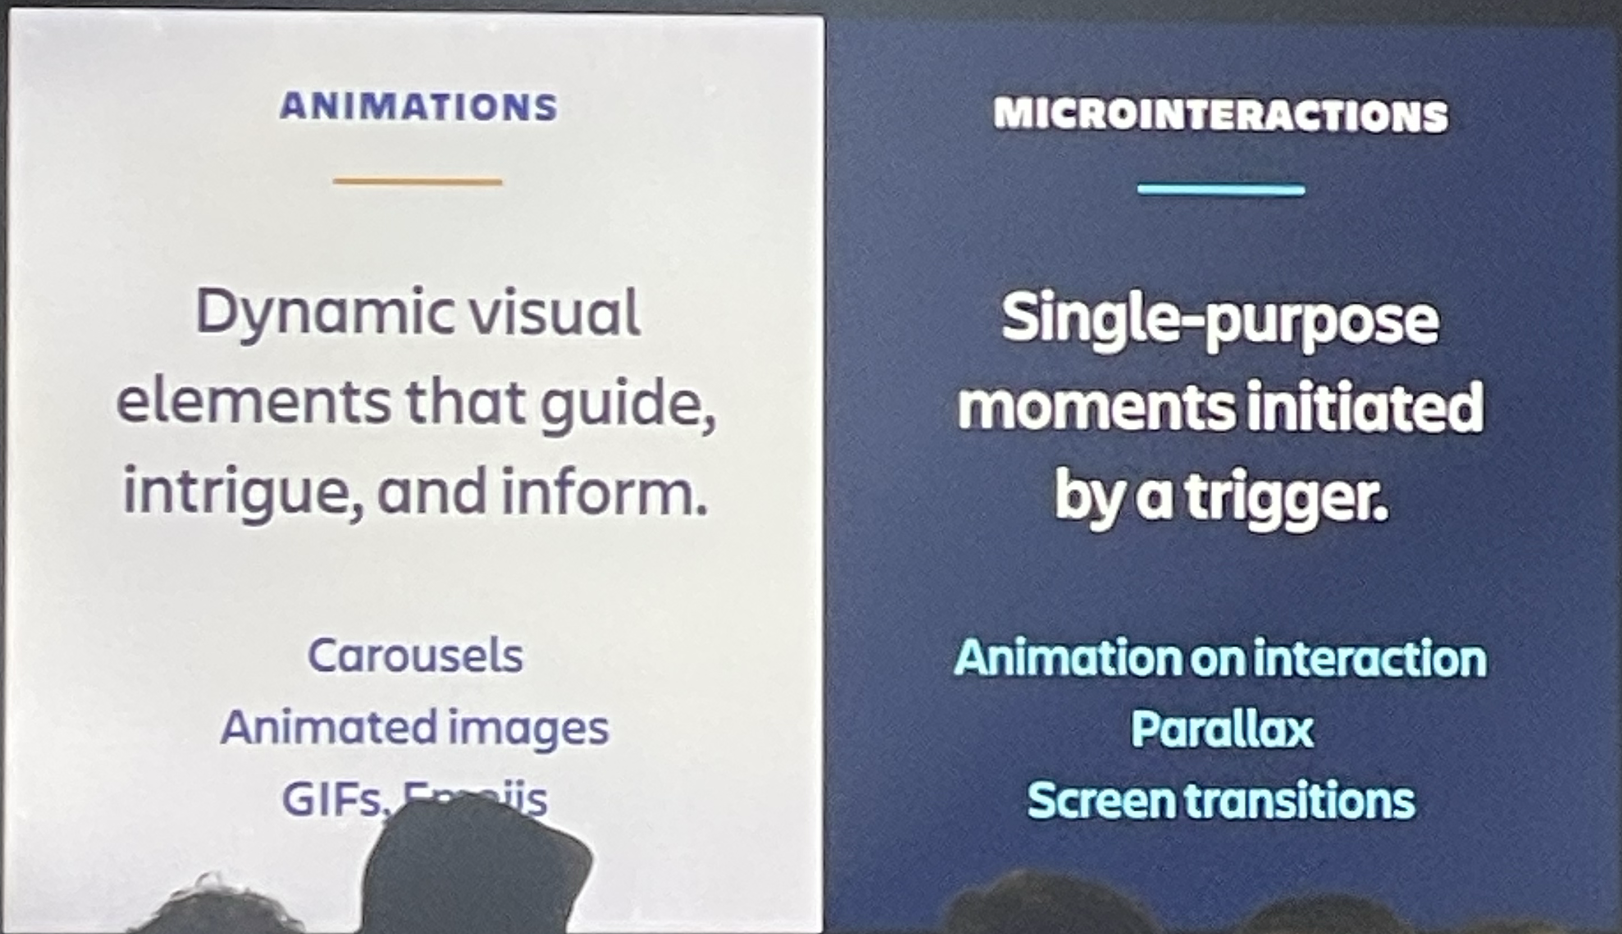 An image from an event showing points on animations vs microanimations.